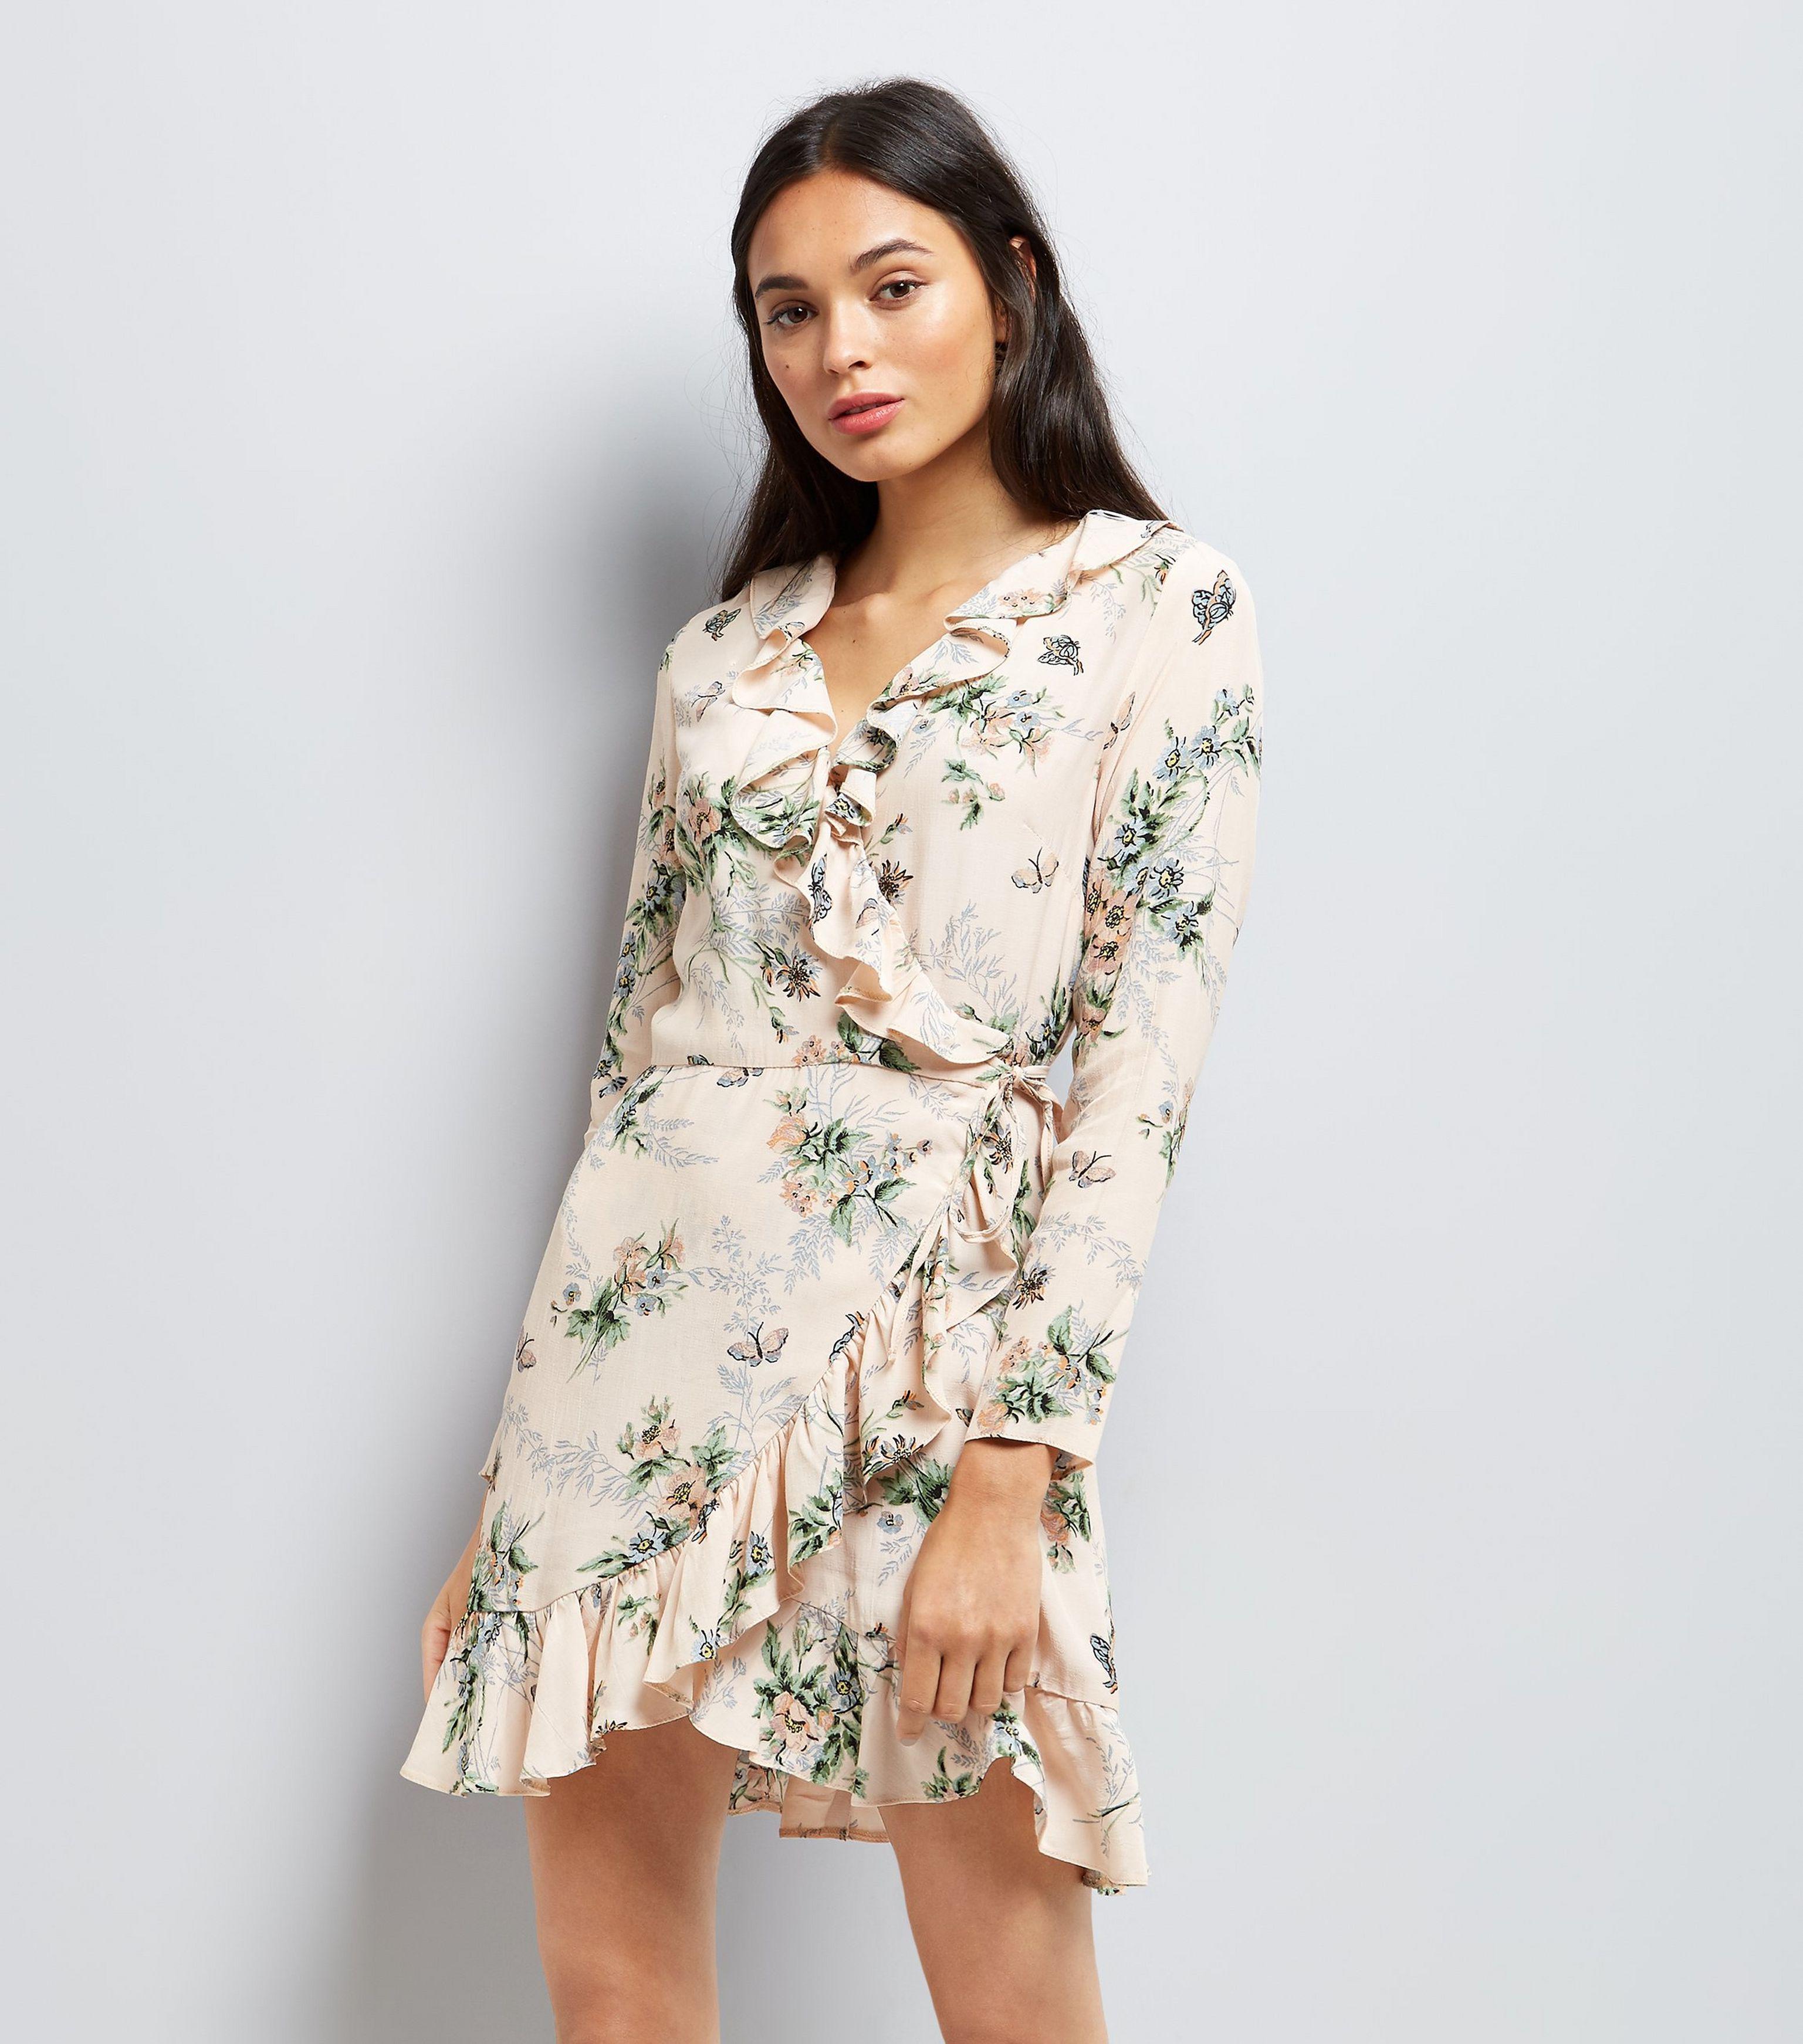 new look pink floral dress